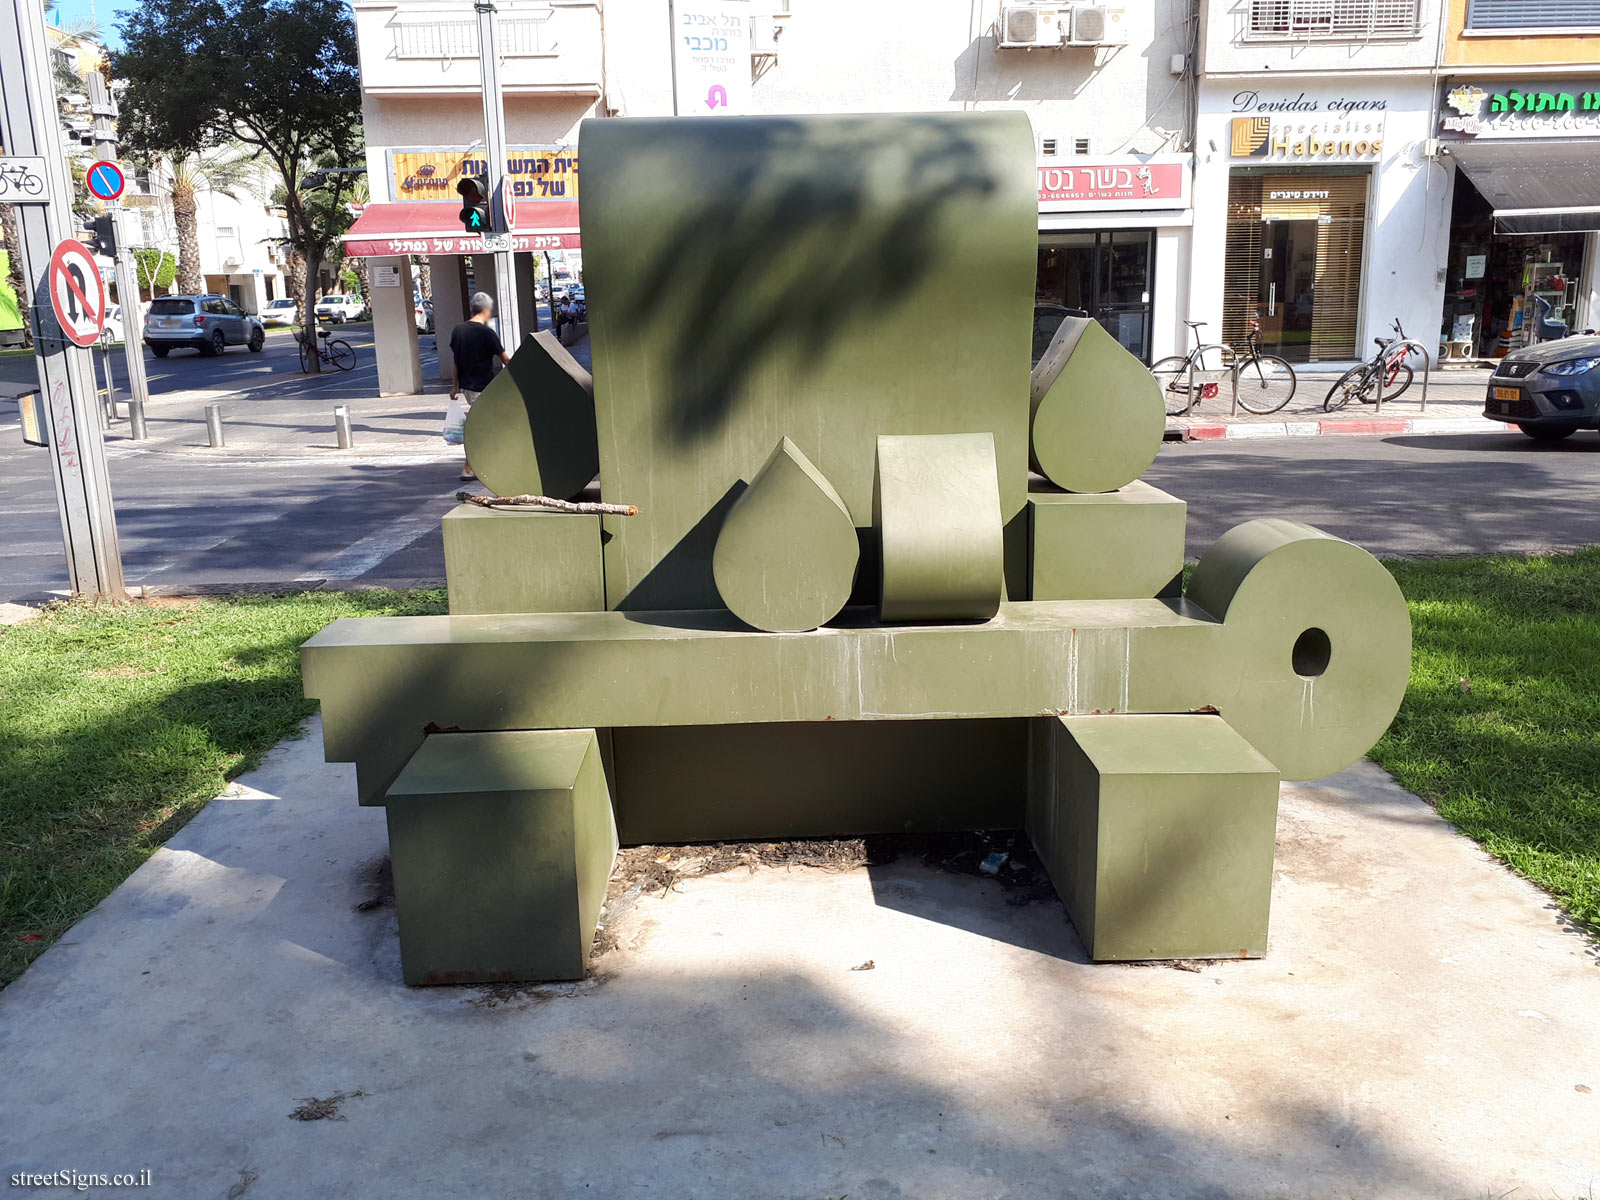 "Unnamed" - Outdoor sculpture by Issac Golombeck - Milan Square, Tel Aviv-Yafo, Israel